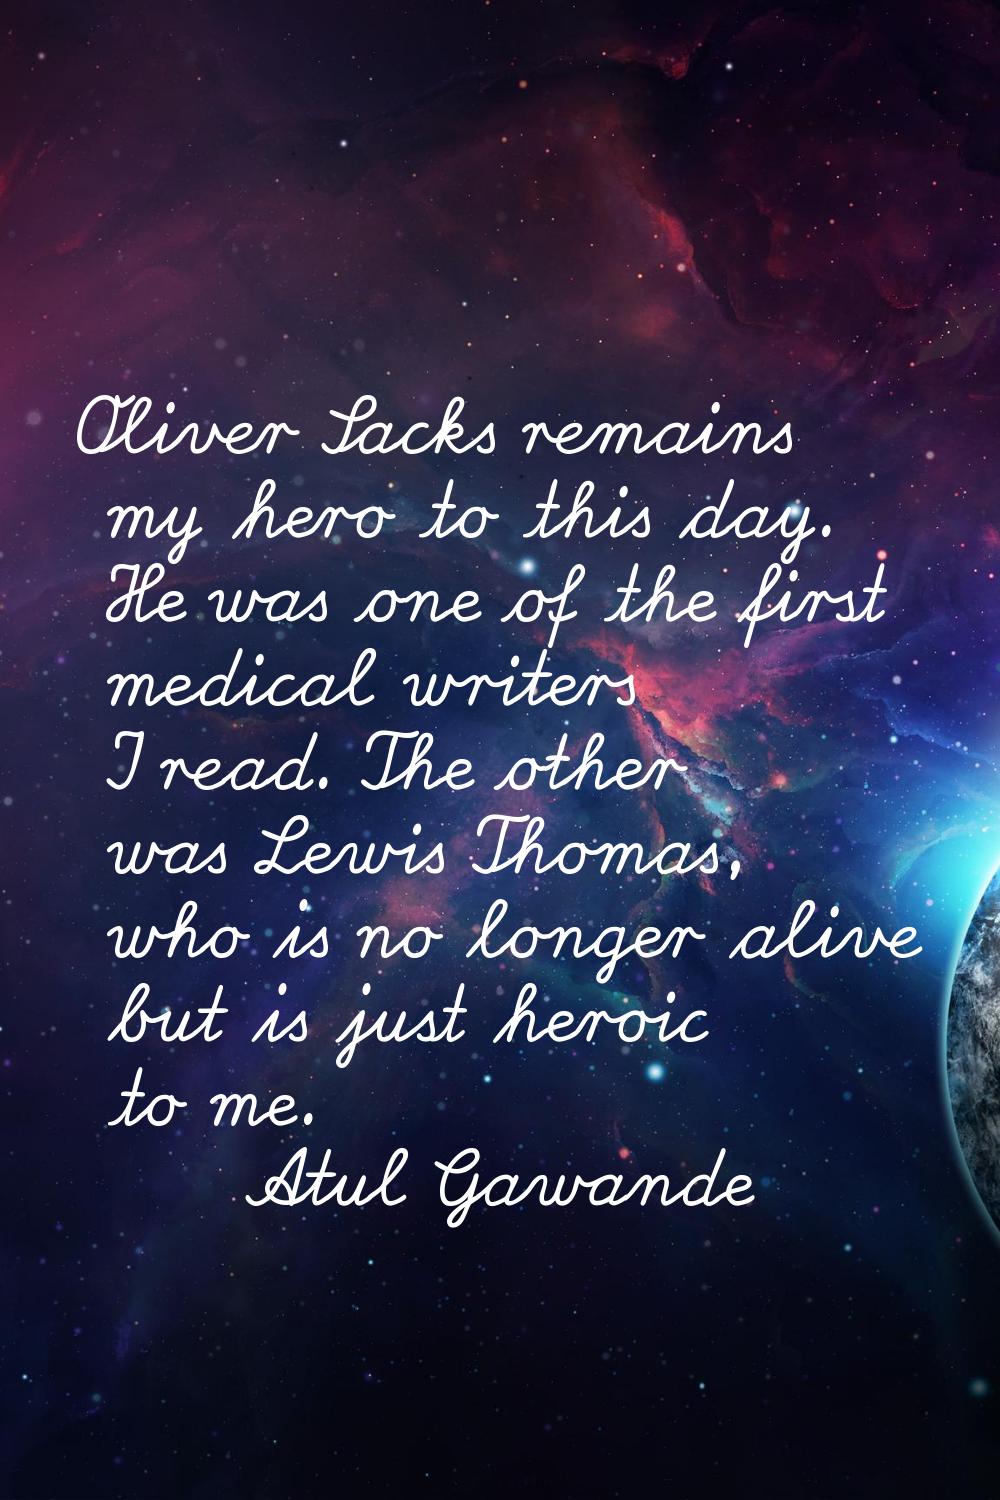 Oliver Sacks remains my hero to this day. He was one of the first medical writers I read. The other